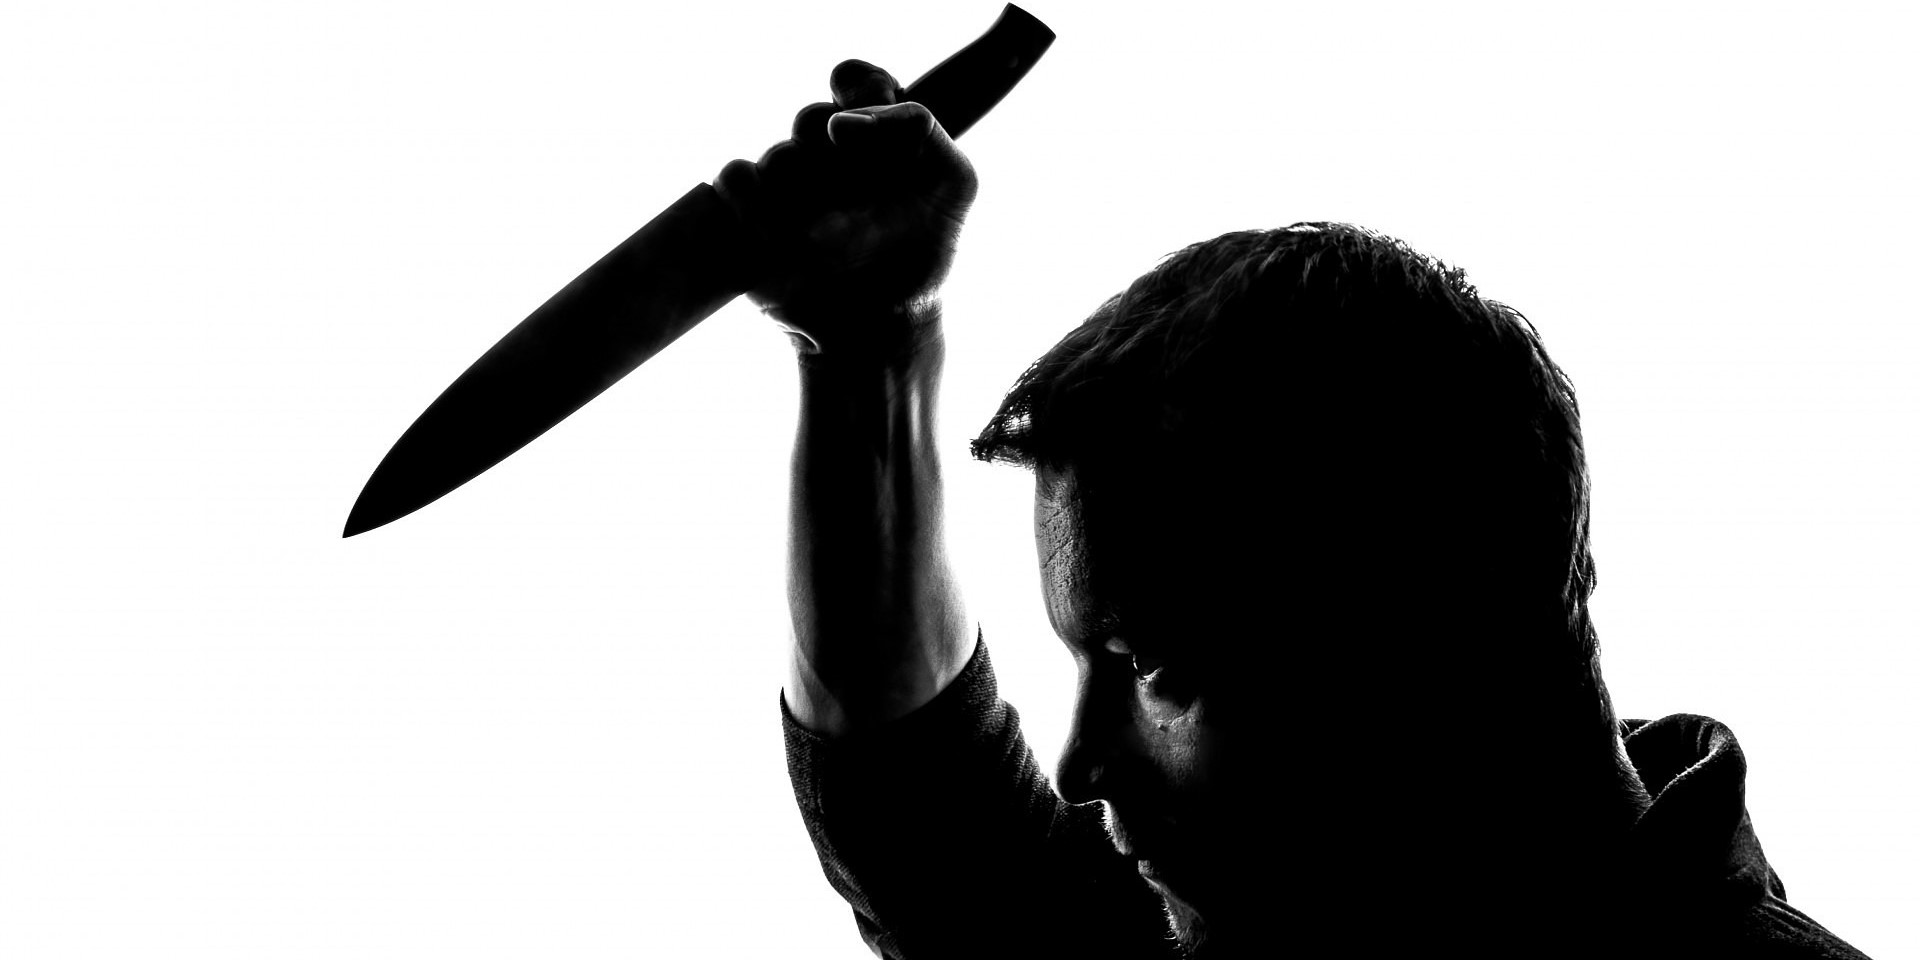 Telangana horror: Man stabs woman to death for rejecting his advances